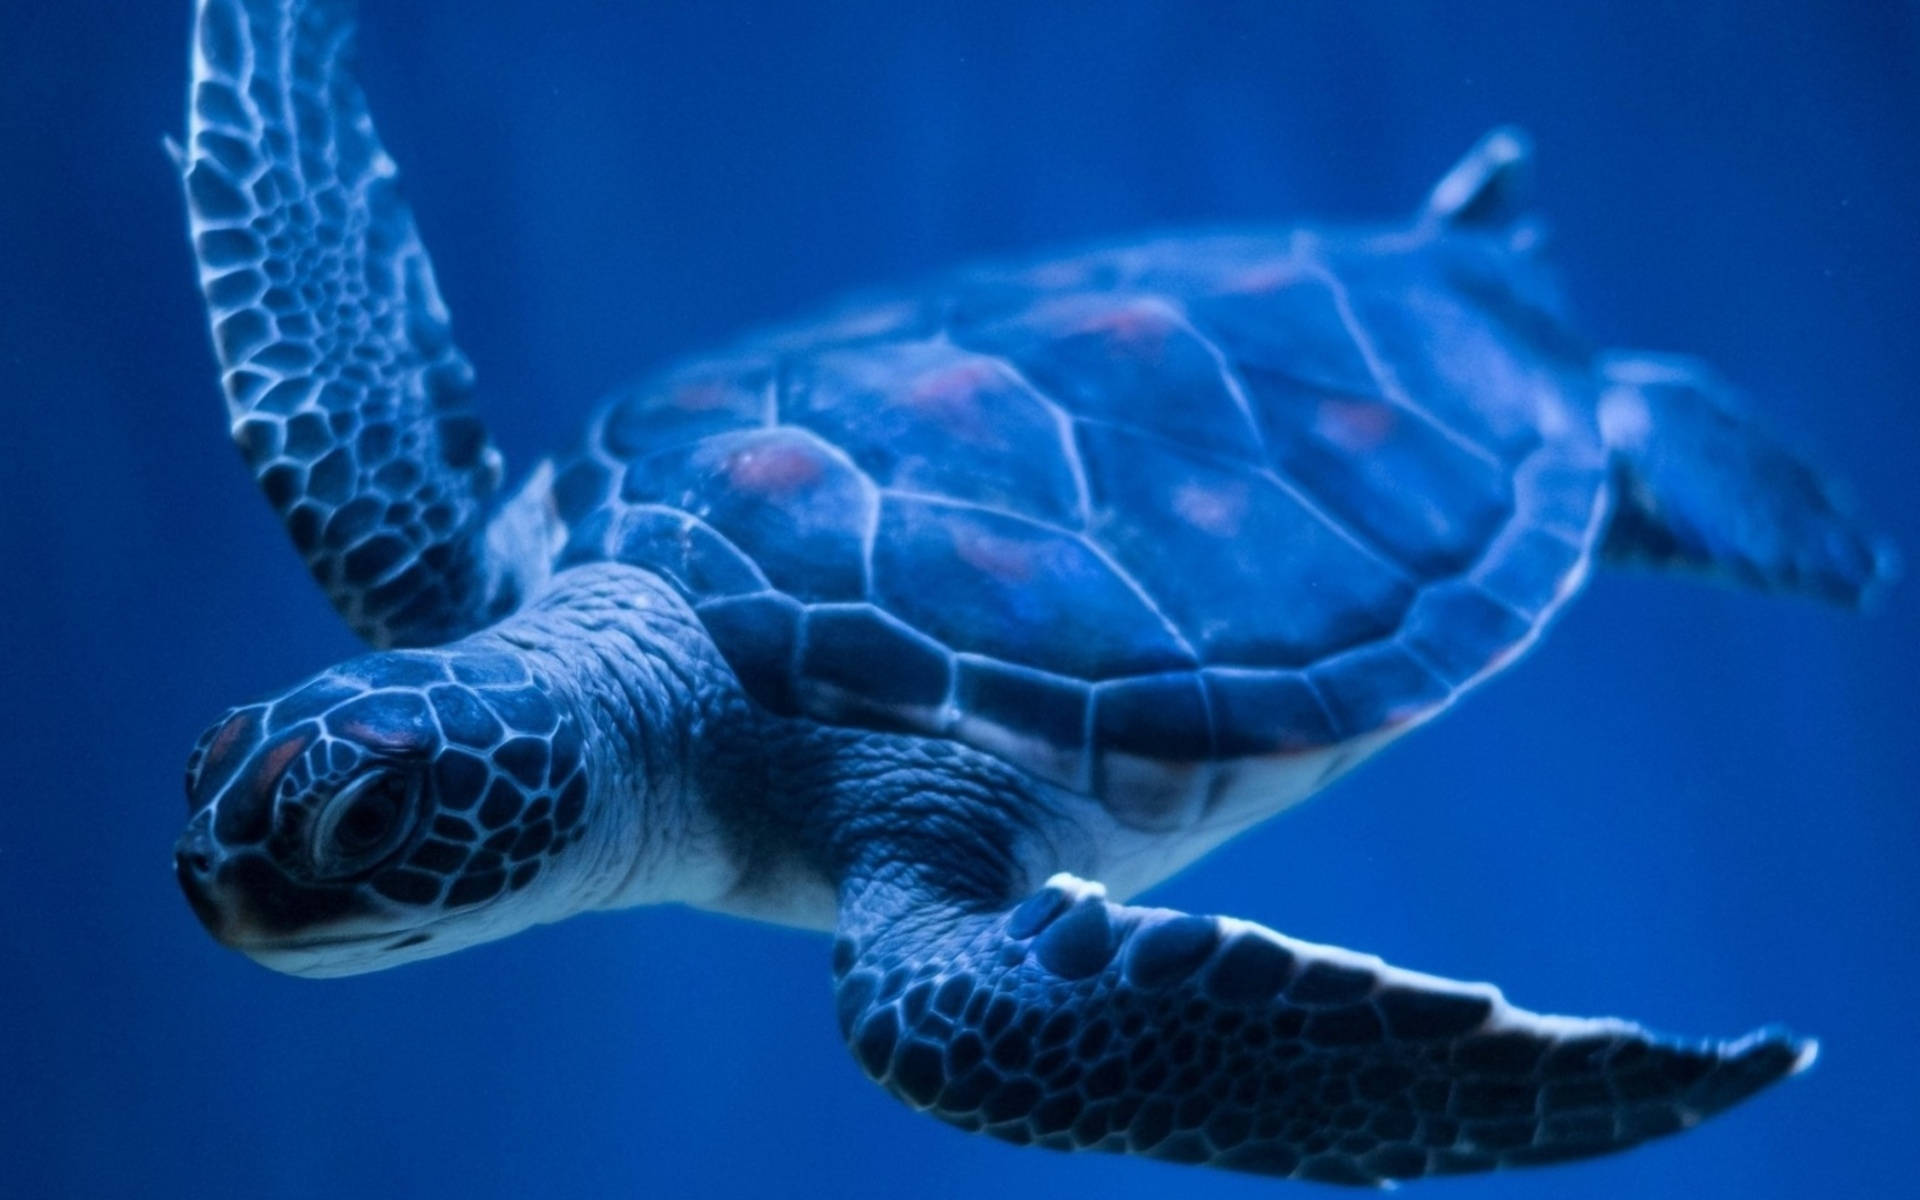 Cool Turtle Under The Blue Sea Background